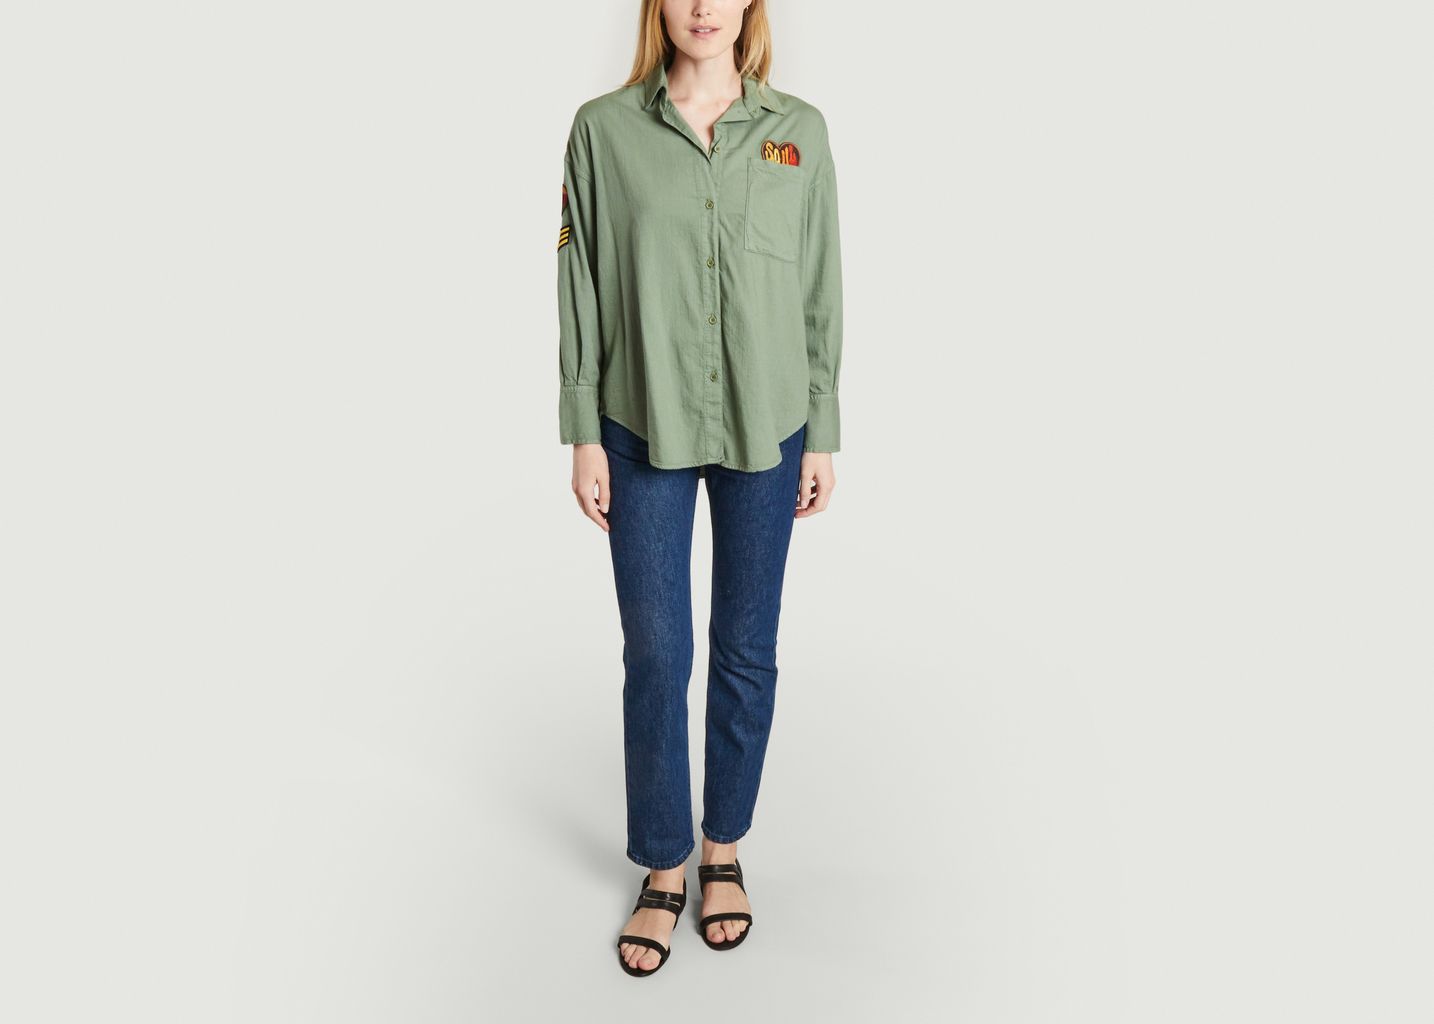 Celeste oversized shirt with patches - Five